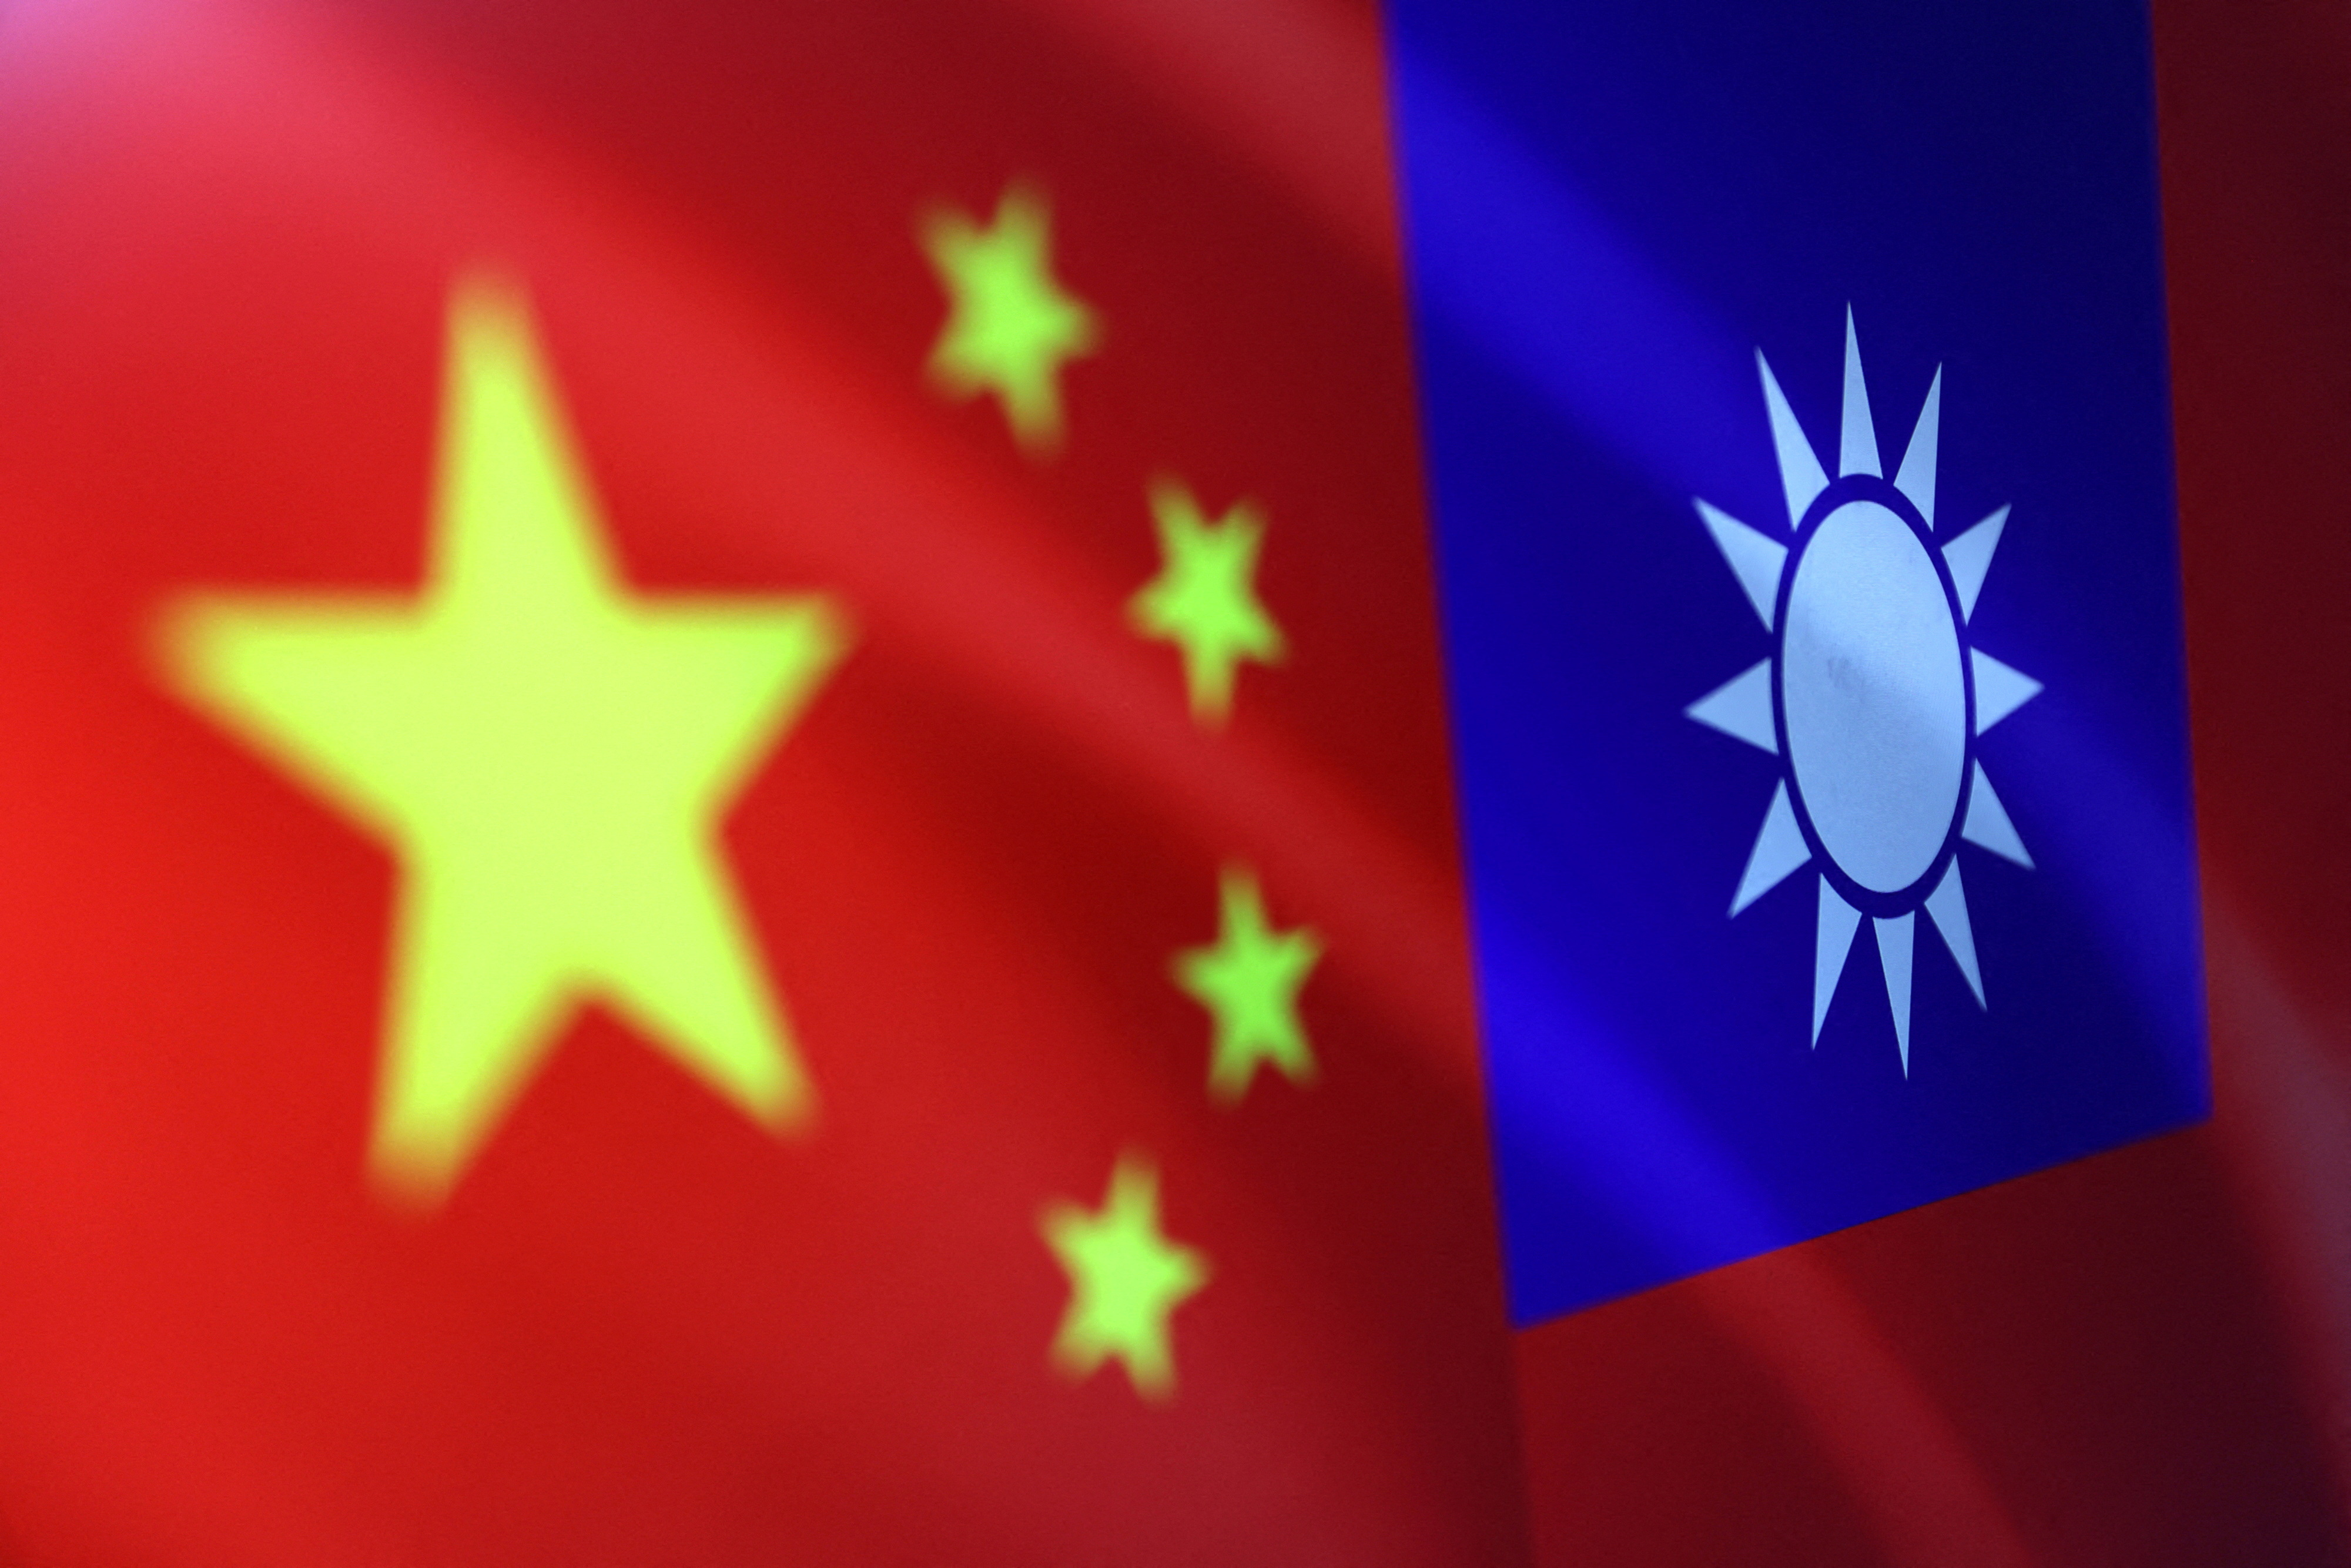 Illustration shows Chinese and Taiwanese flags